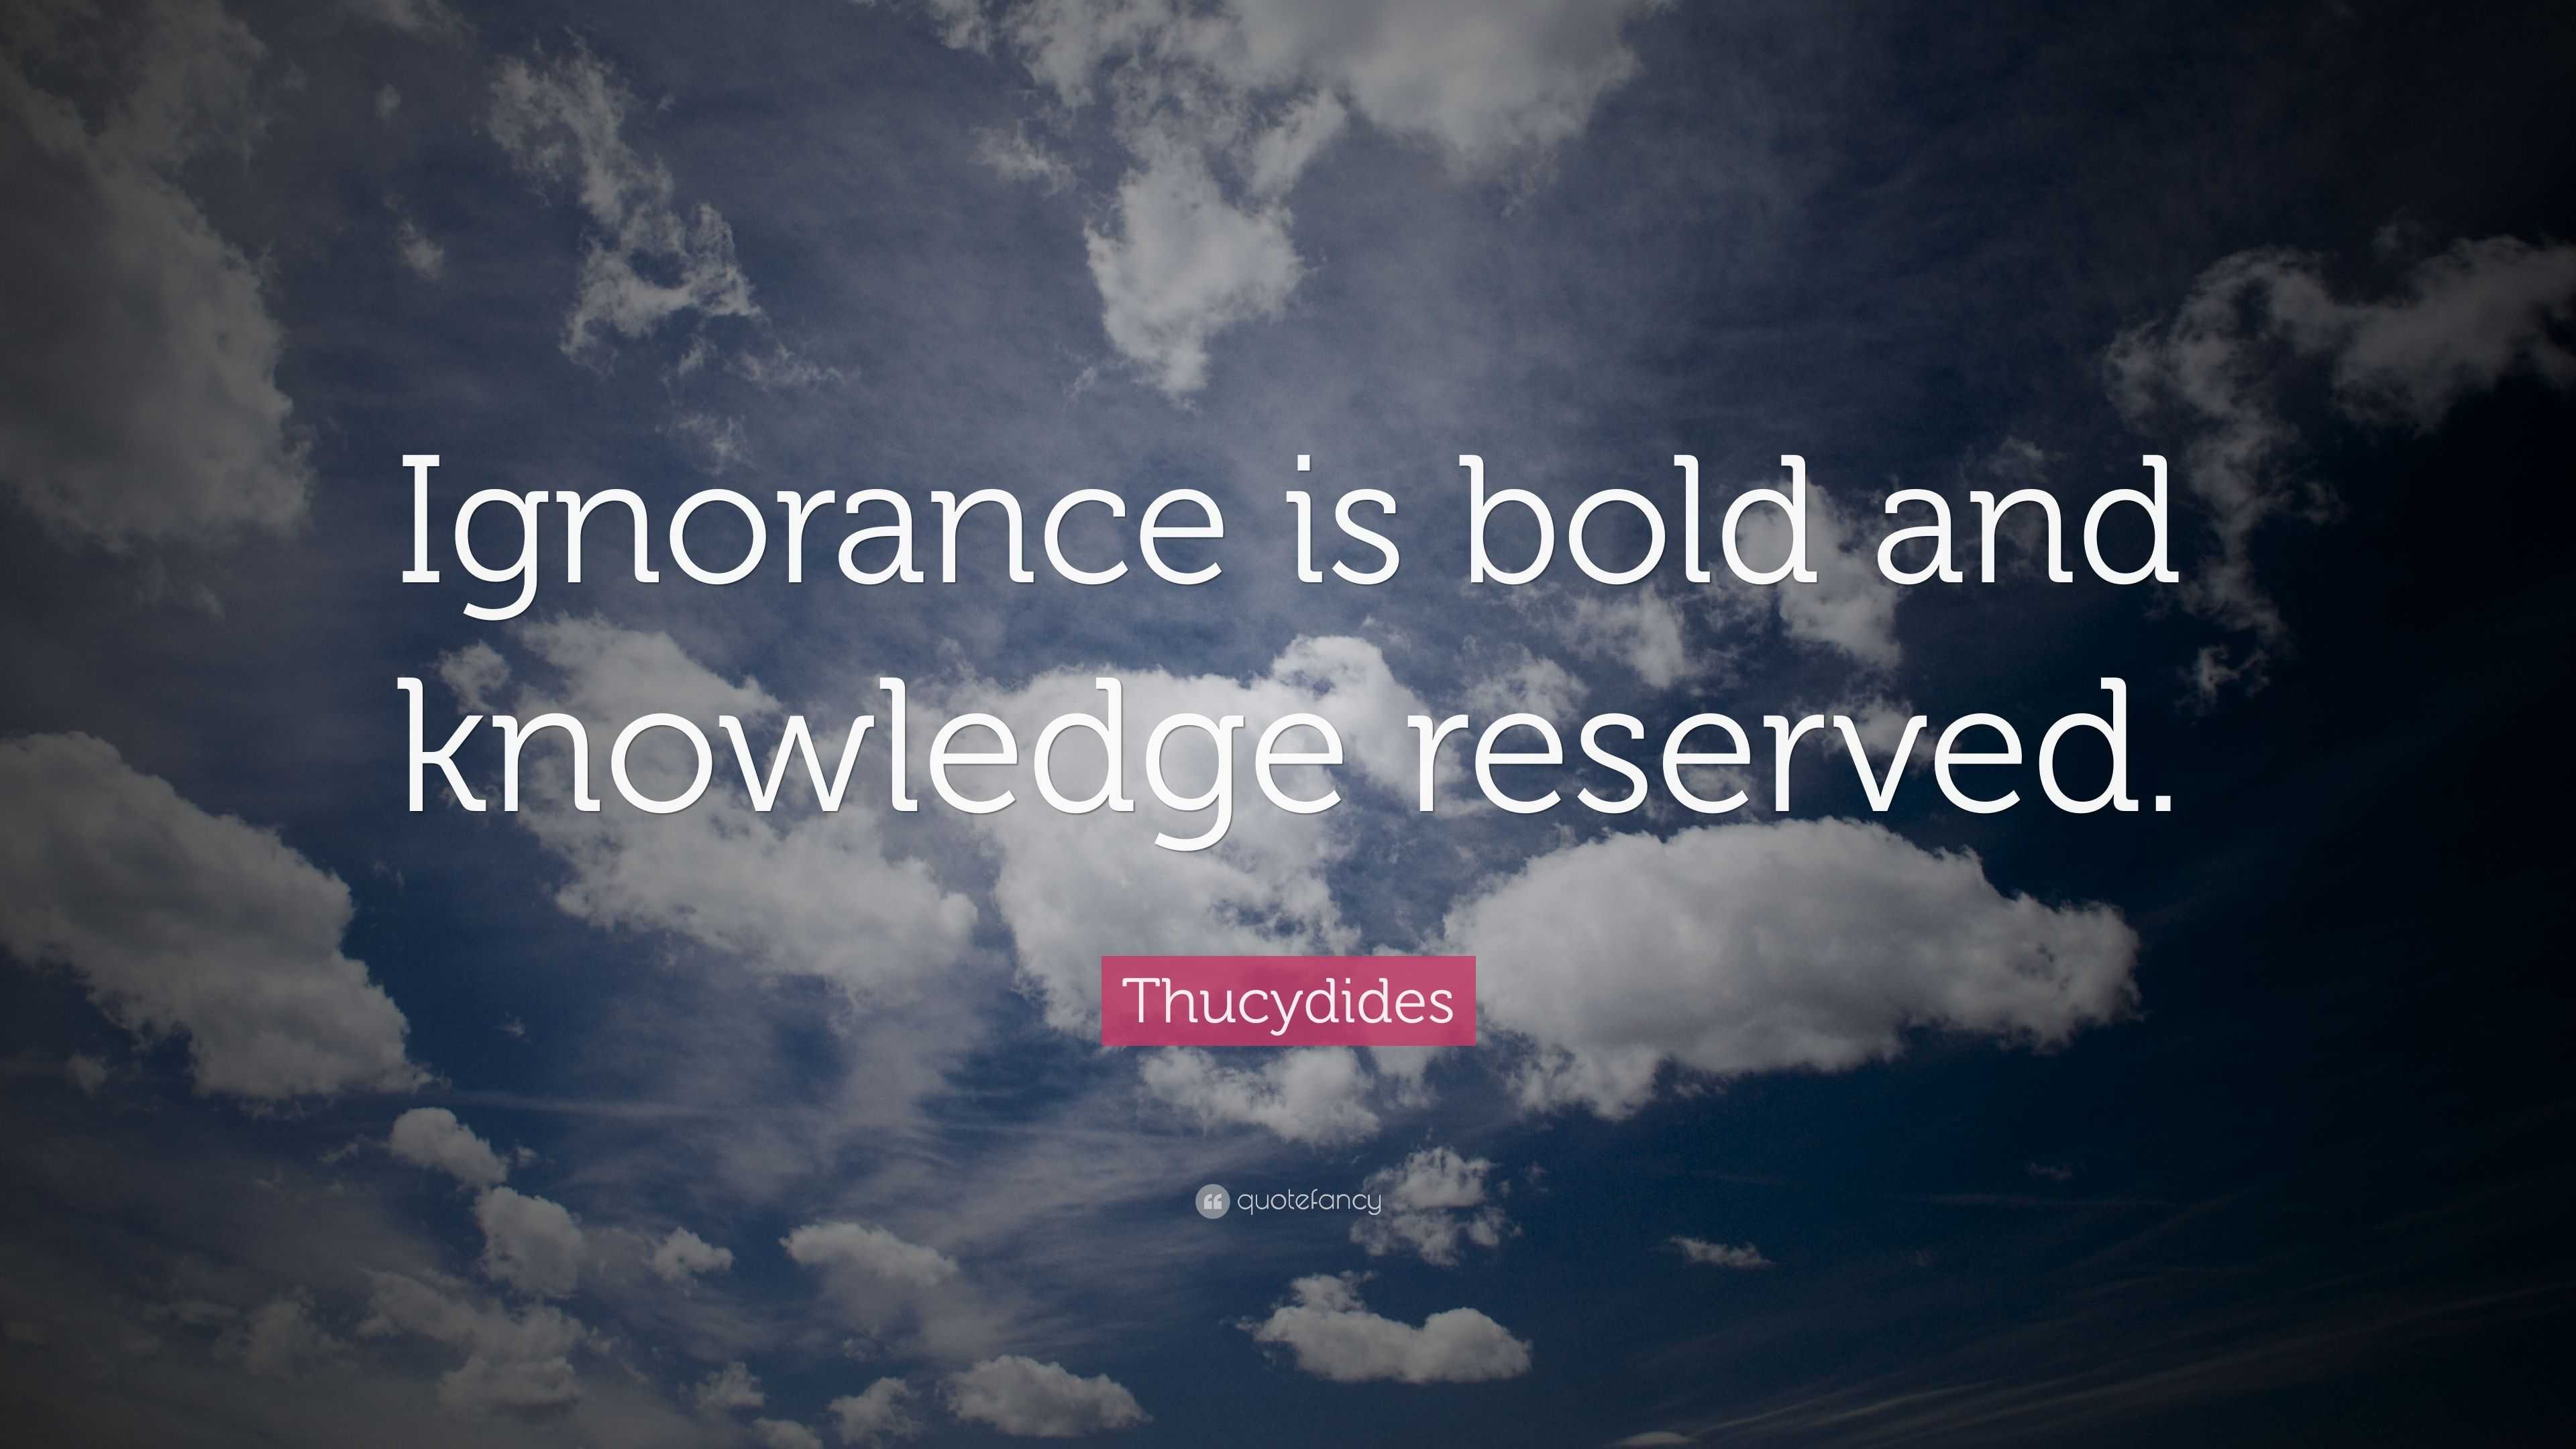 Thucydides Quote: “Ignorance is bold and knowledge reserved.”